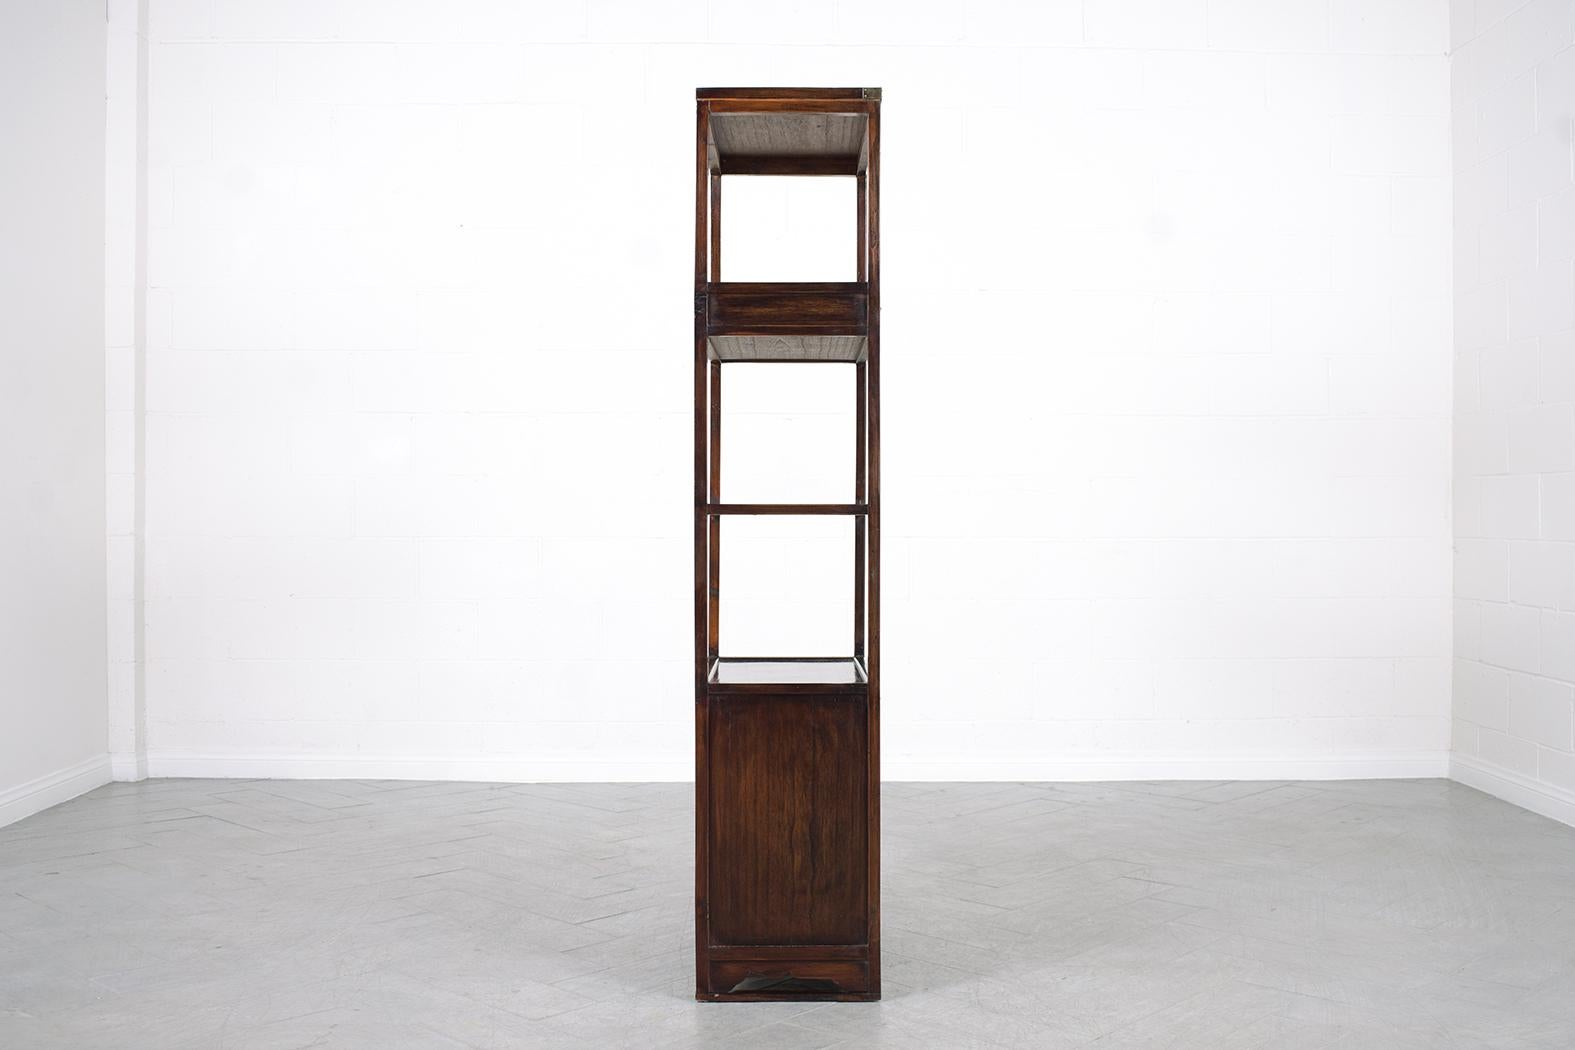 Vintage Chinese Elm Wood Bookcase: A Statement of Timeless Craftsmanship 5